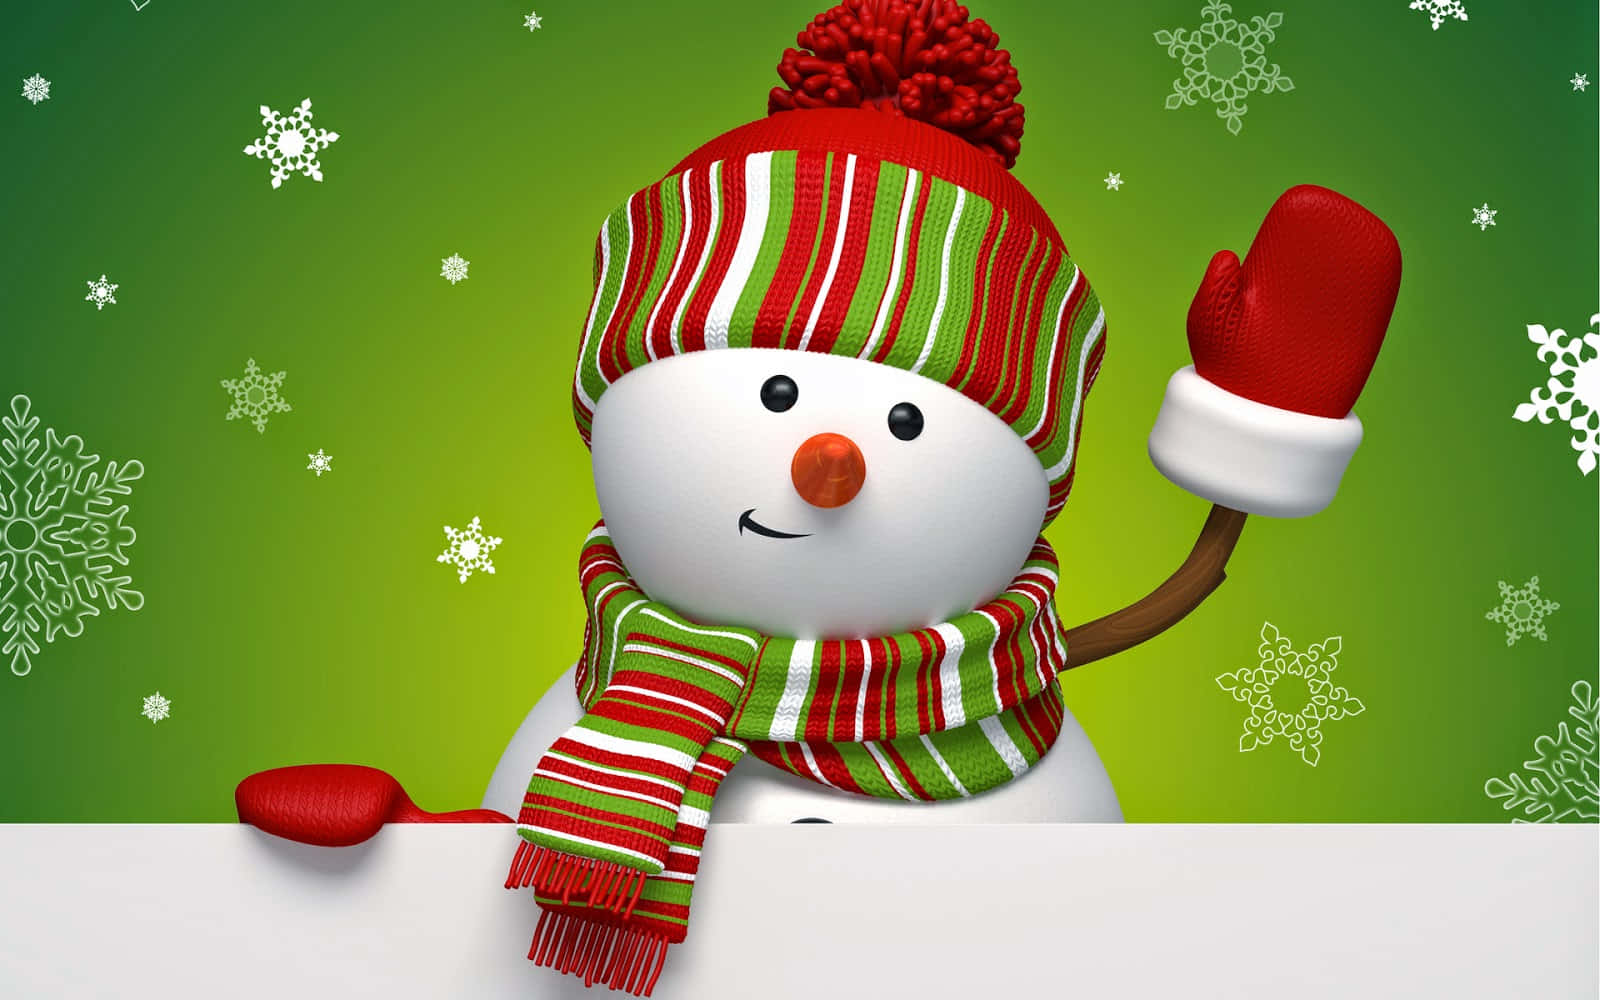 Christmas Cartoon Snowman Waving With Santa Hat Picture